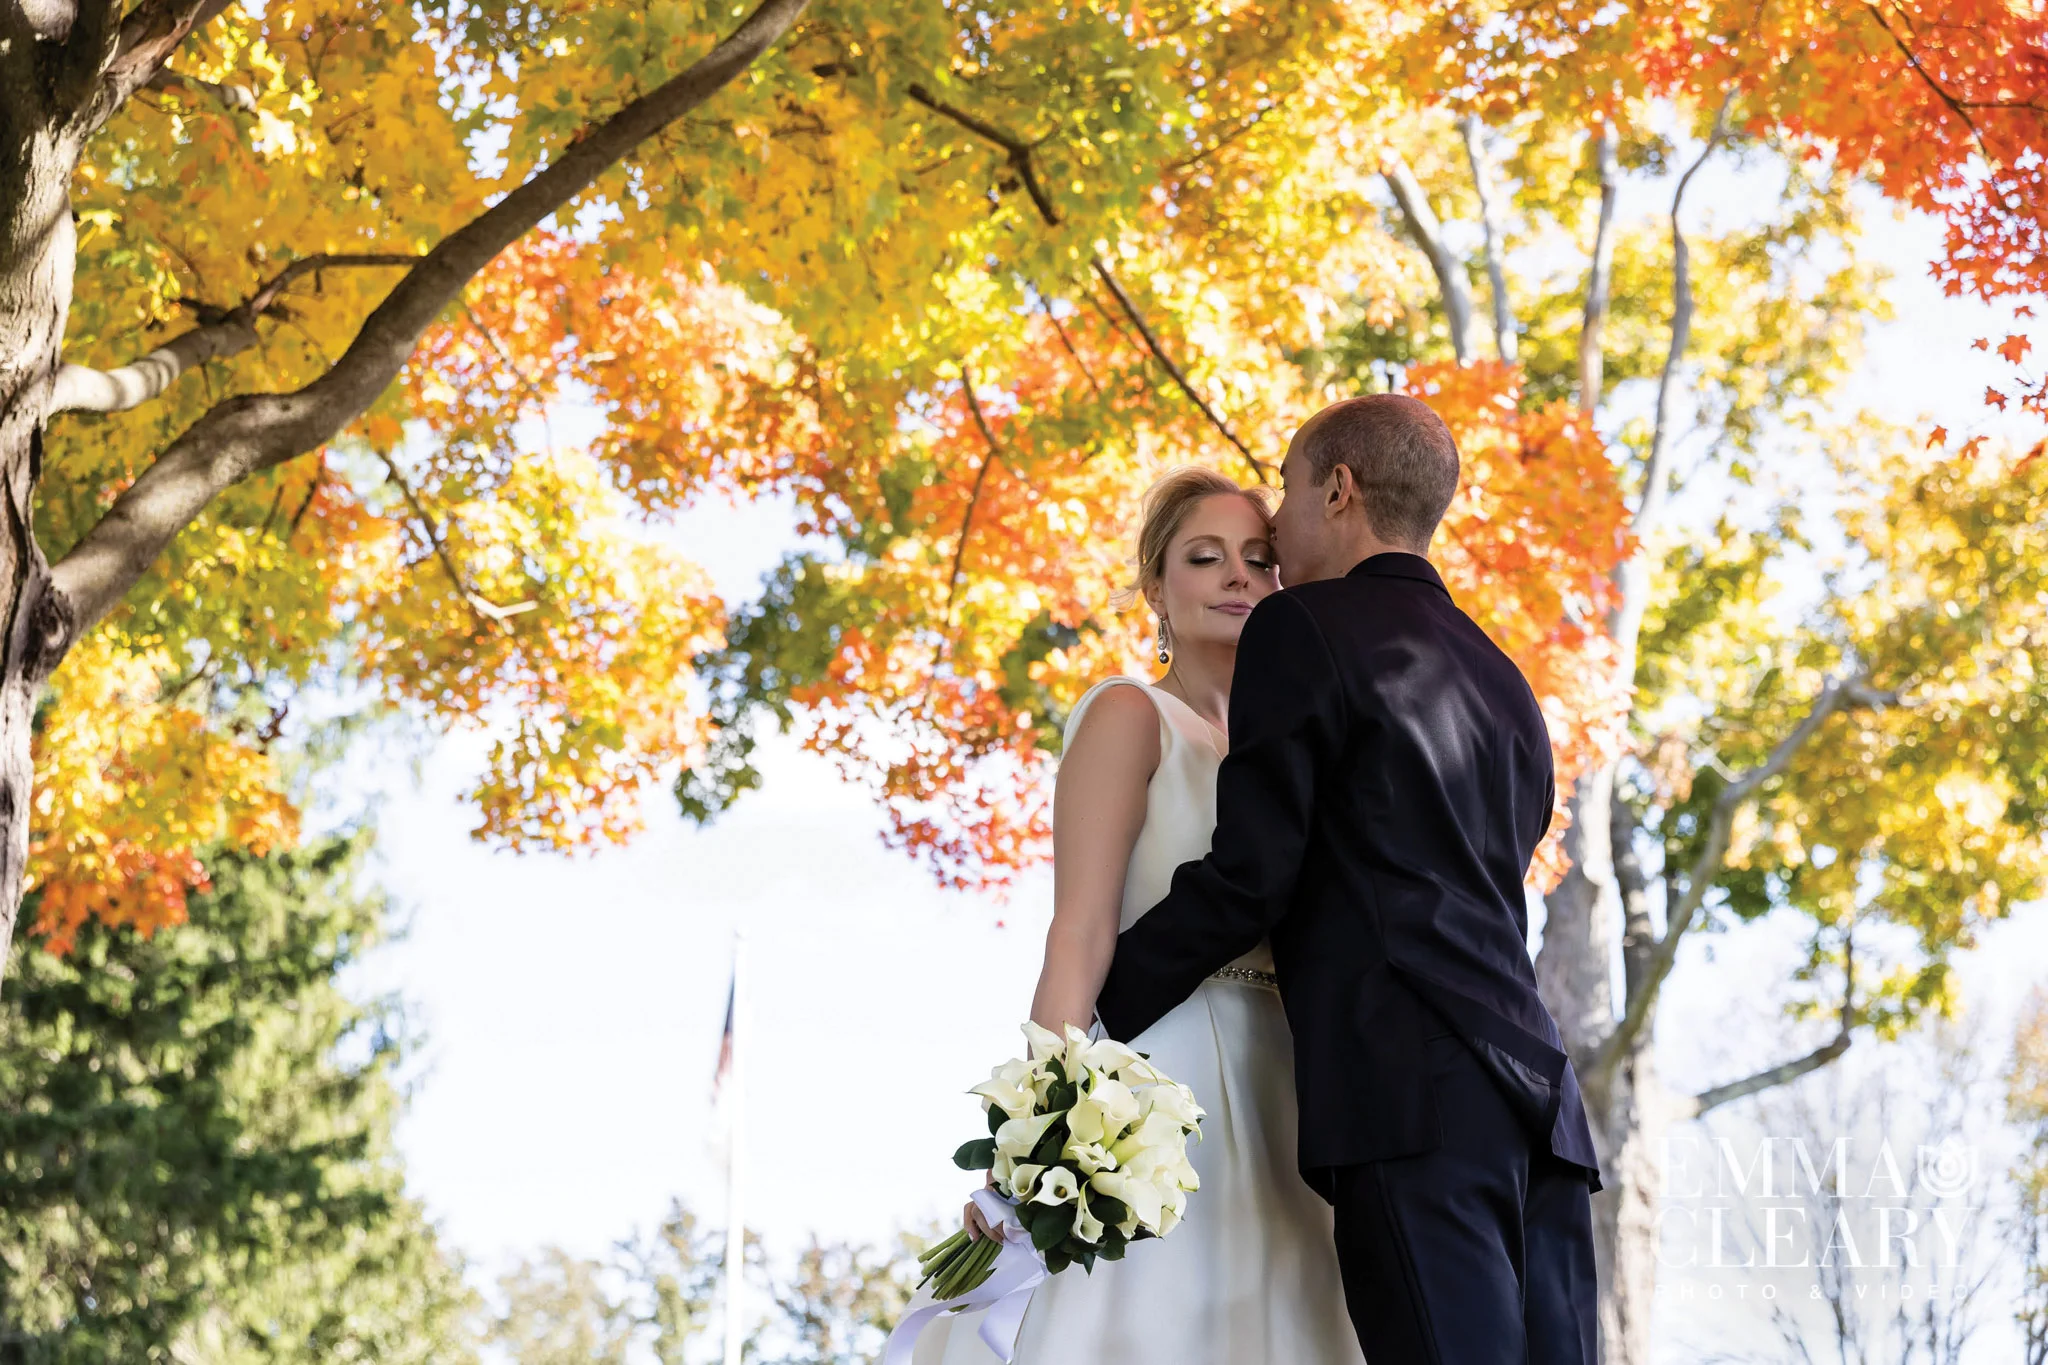 A couple, bride and groom, embracing under a tree in the fall at a beautiful wedding venue in Florham Park, NJ.